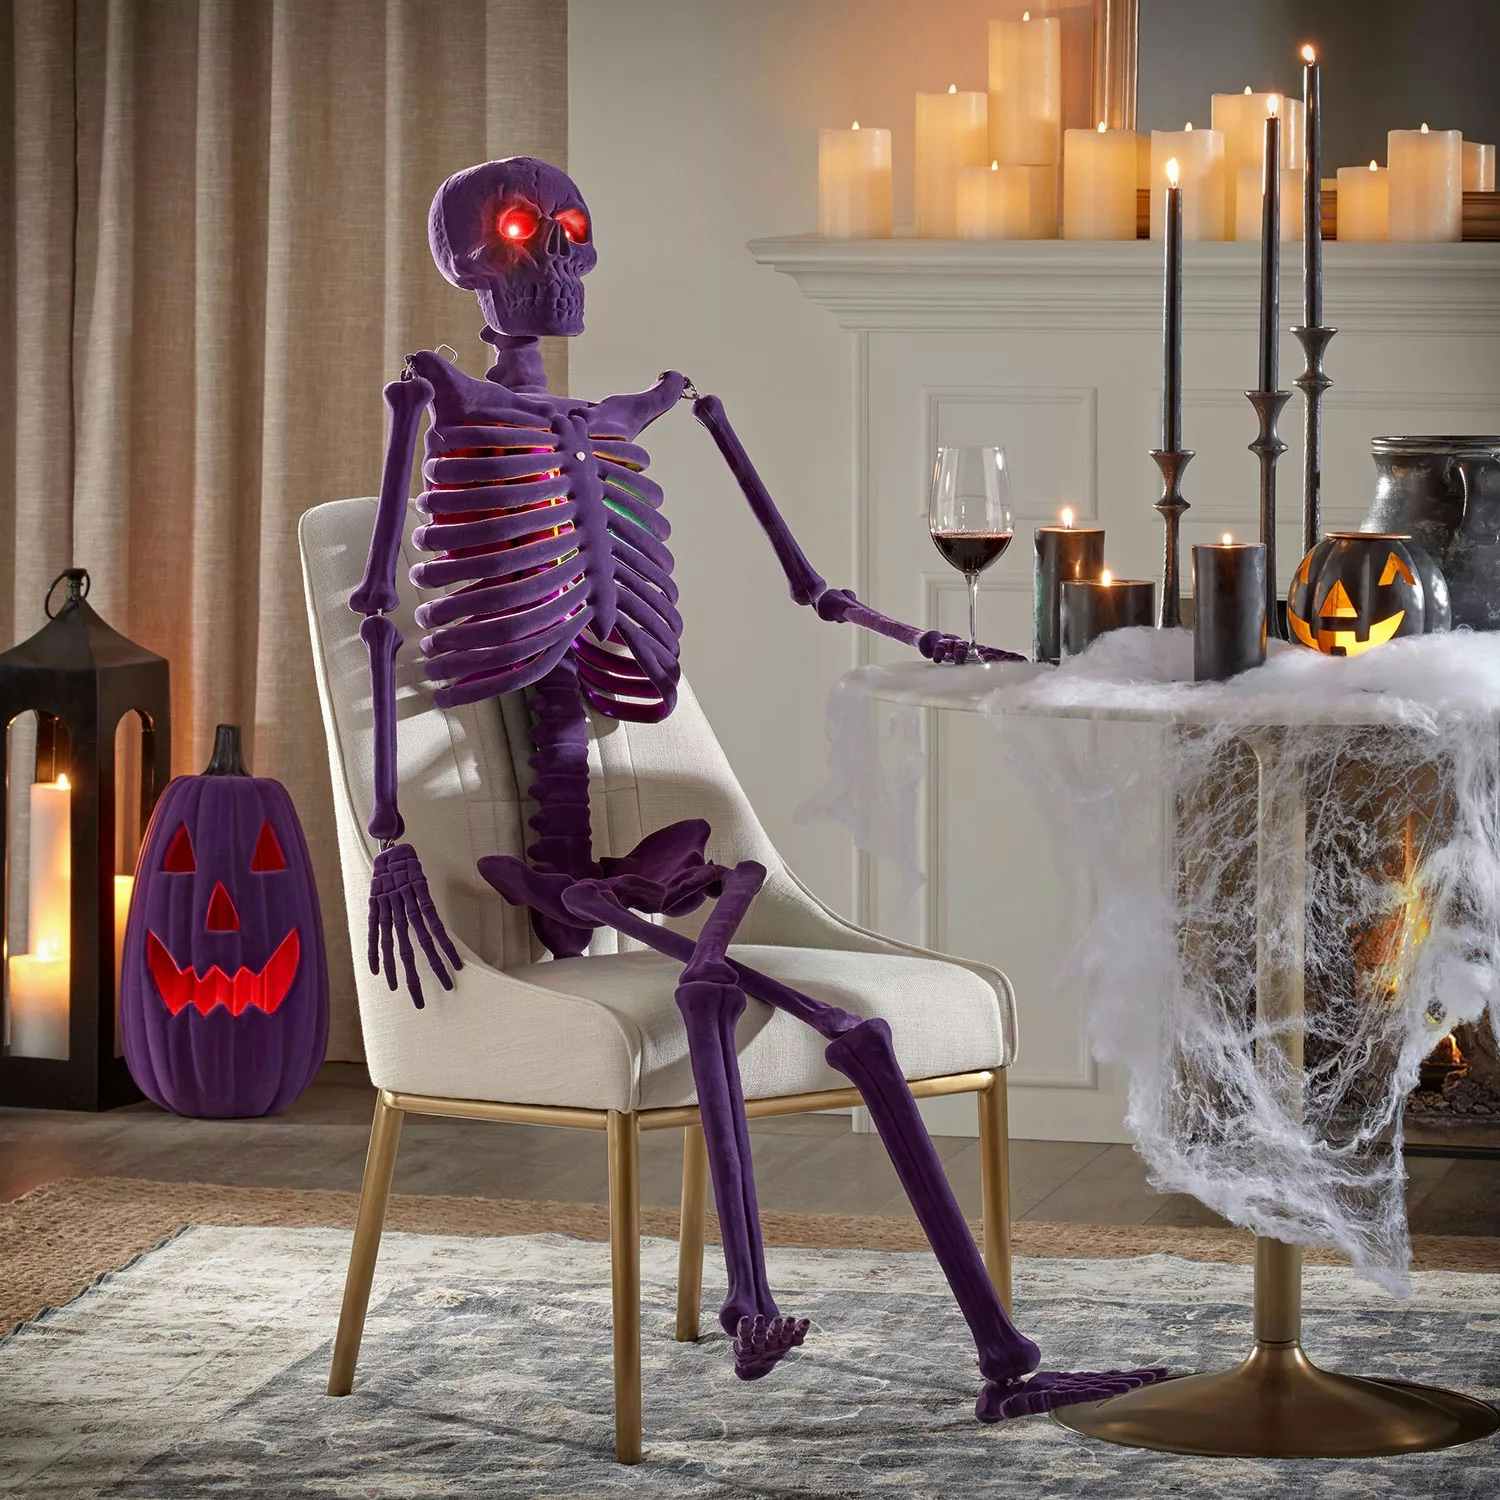 a 6 foot purple skeleton in a chair